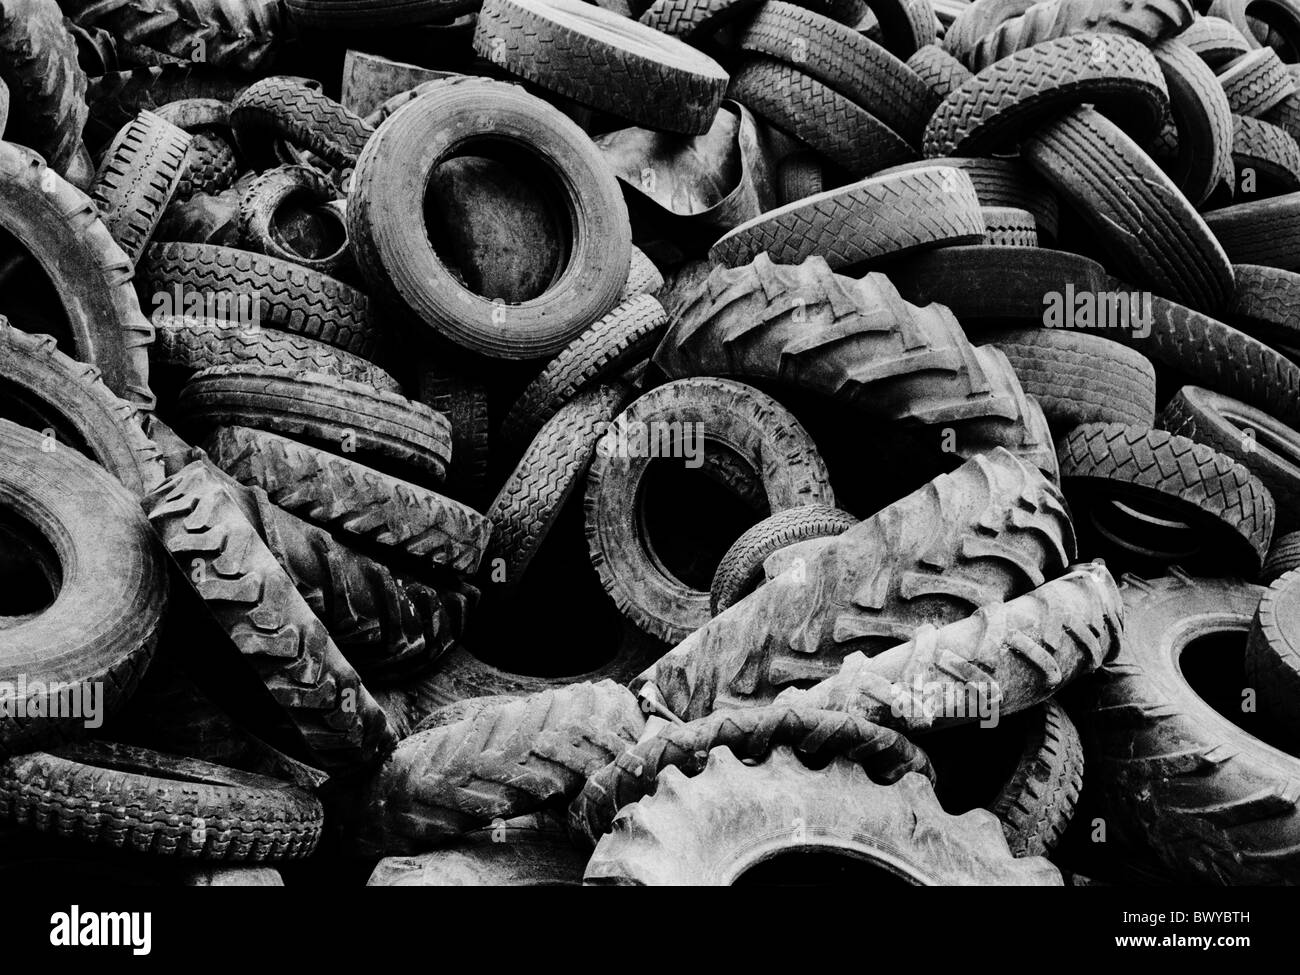 waste tyres in india